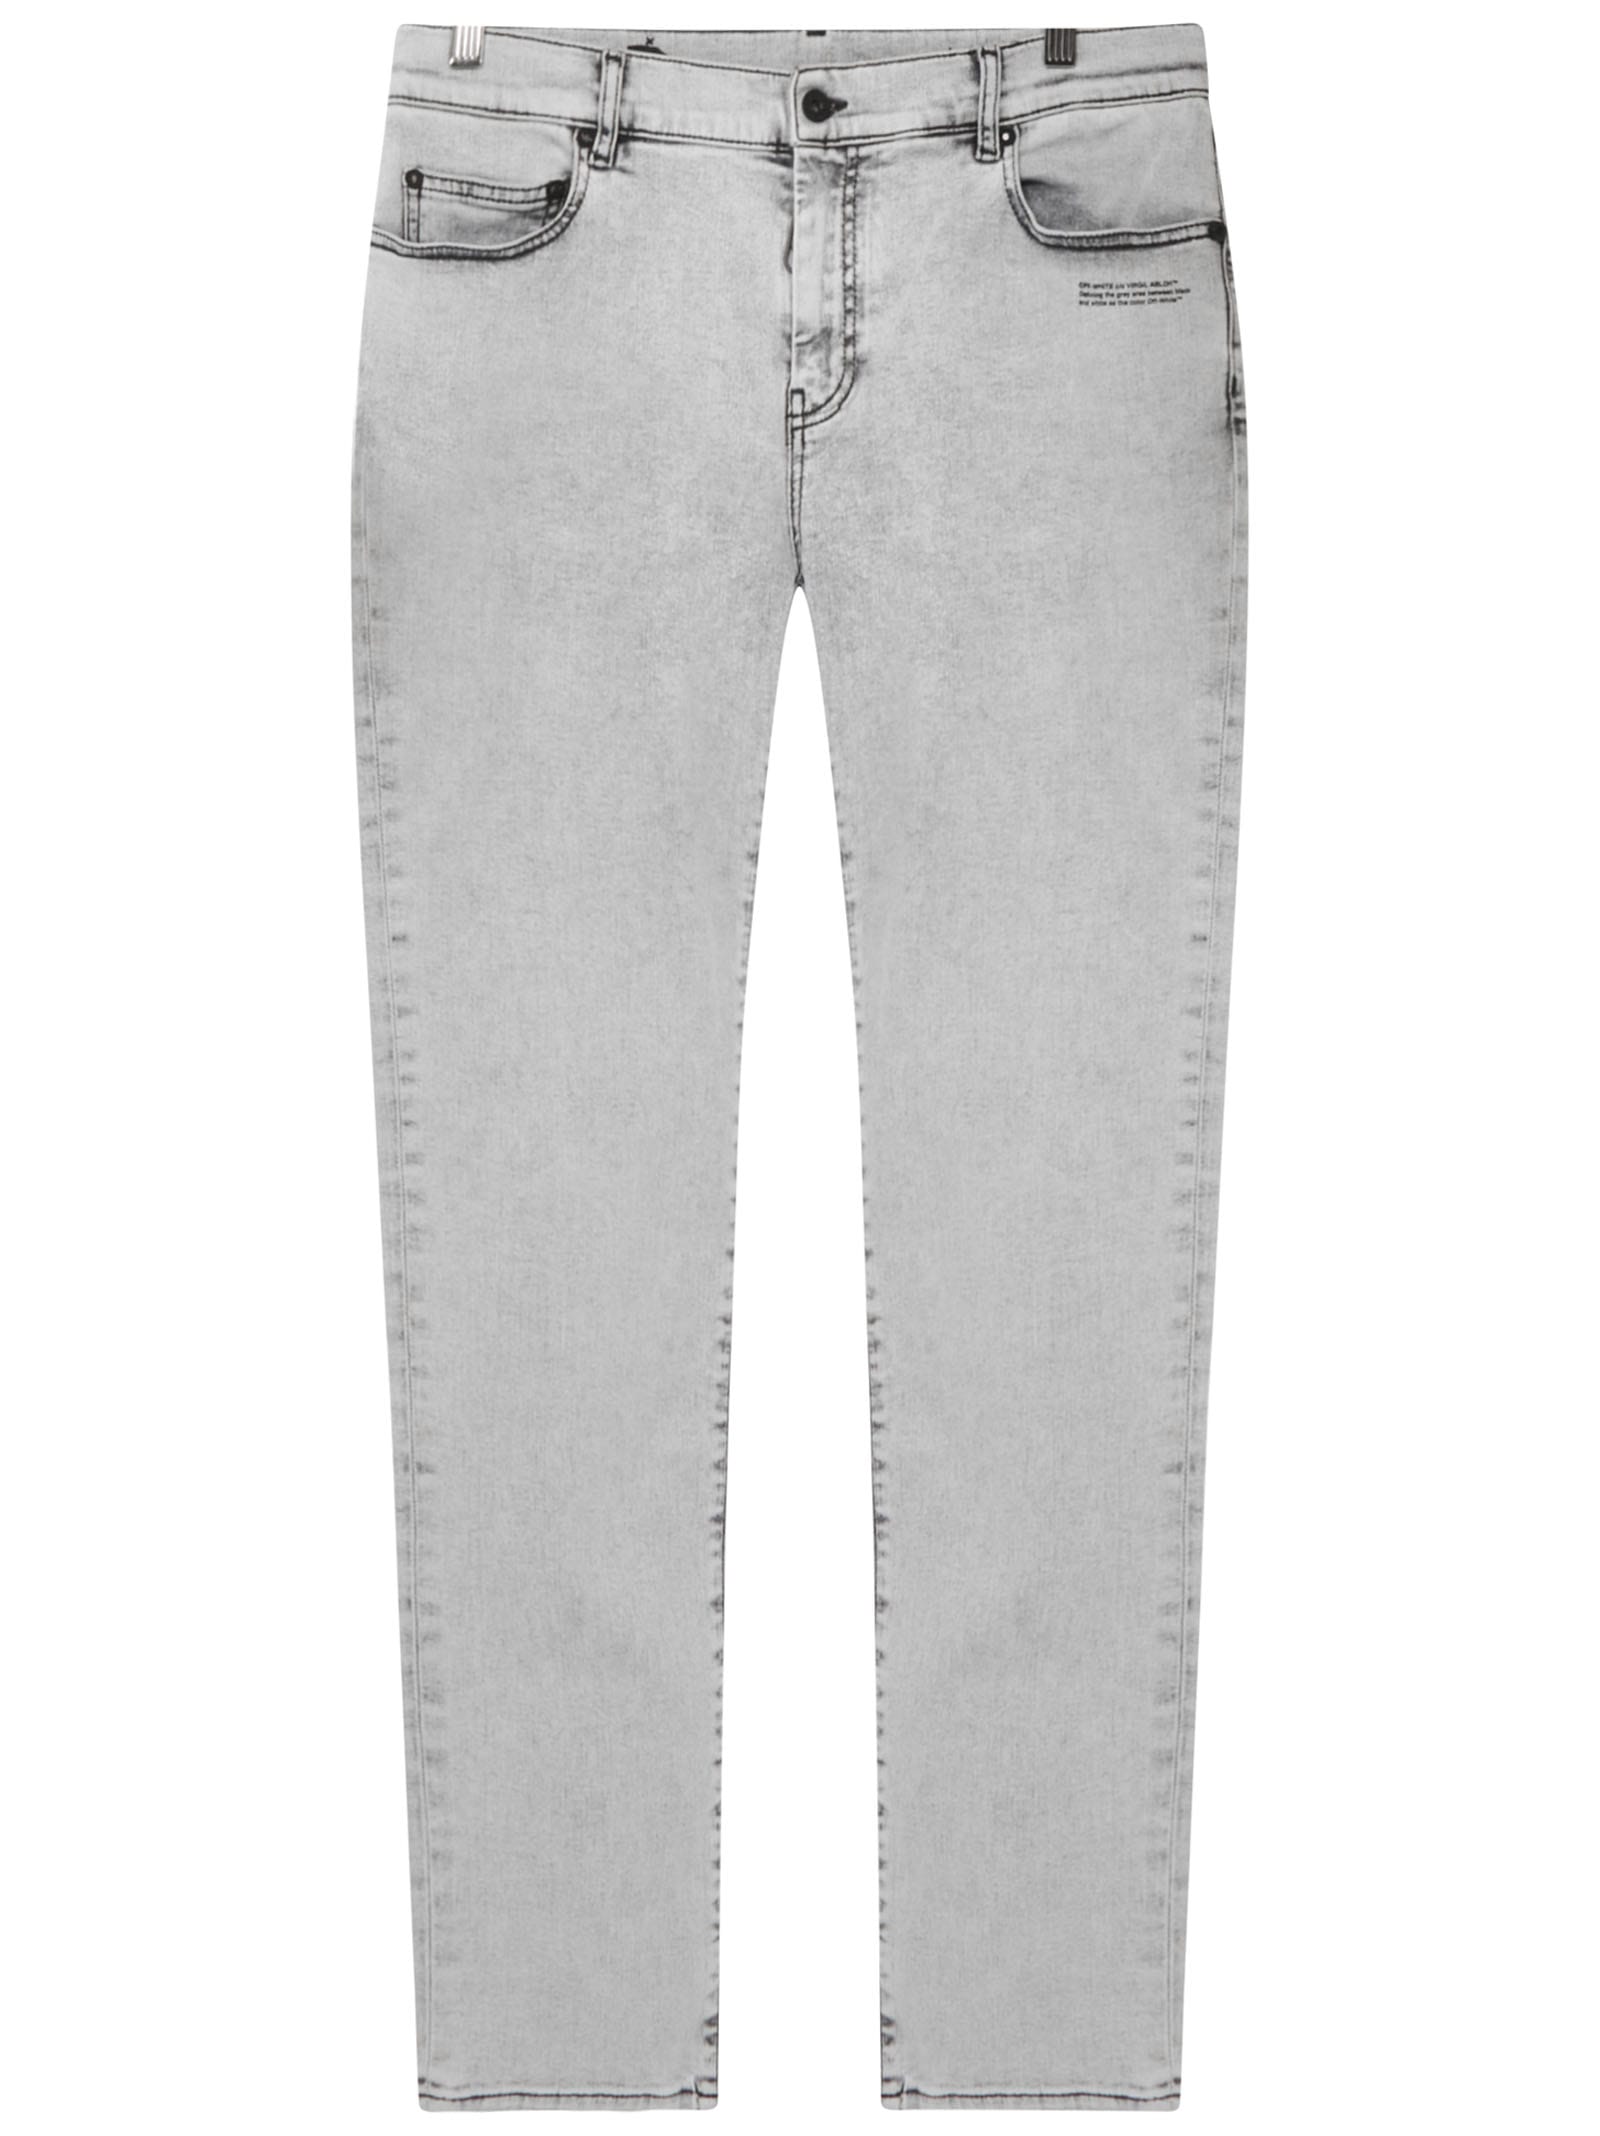 OFF-WHITE OFF-WHITE JEANS,11274439